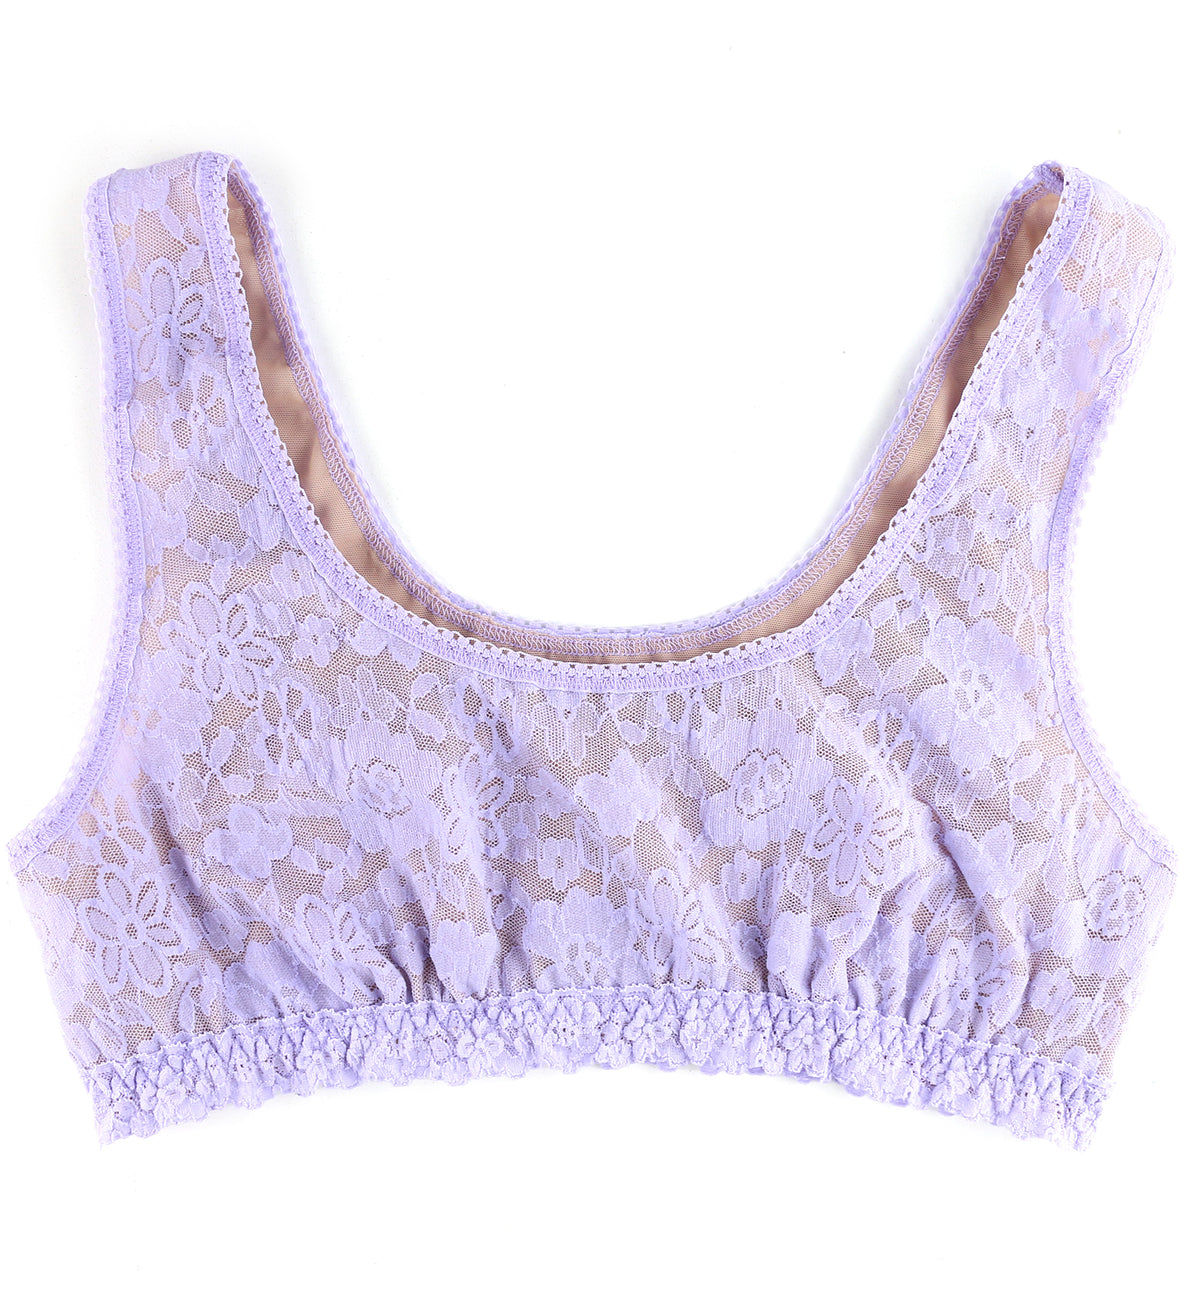 Hanky Panky Daily Lace Scoop Neck Lined Bralette (777991),XS,Lilac Bloom - Lilac Bloom,XS